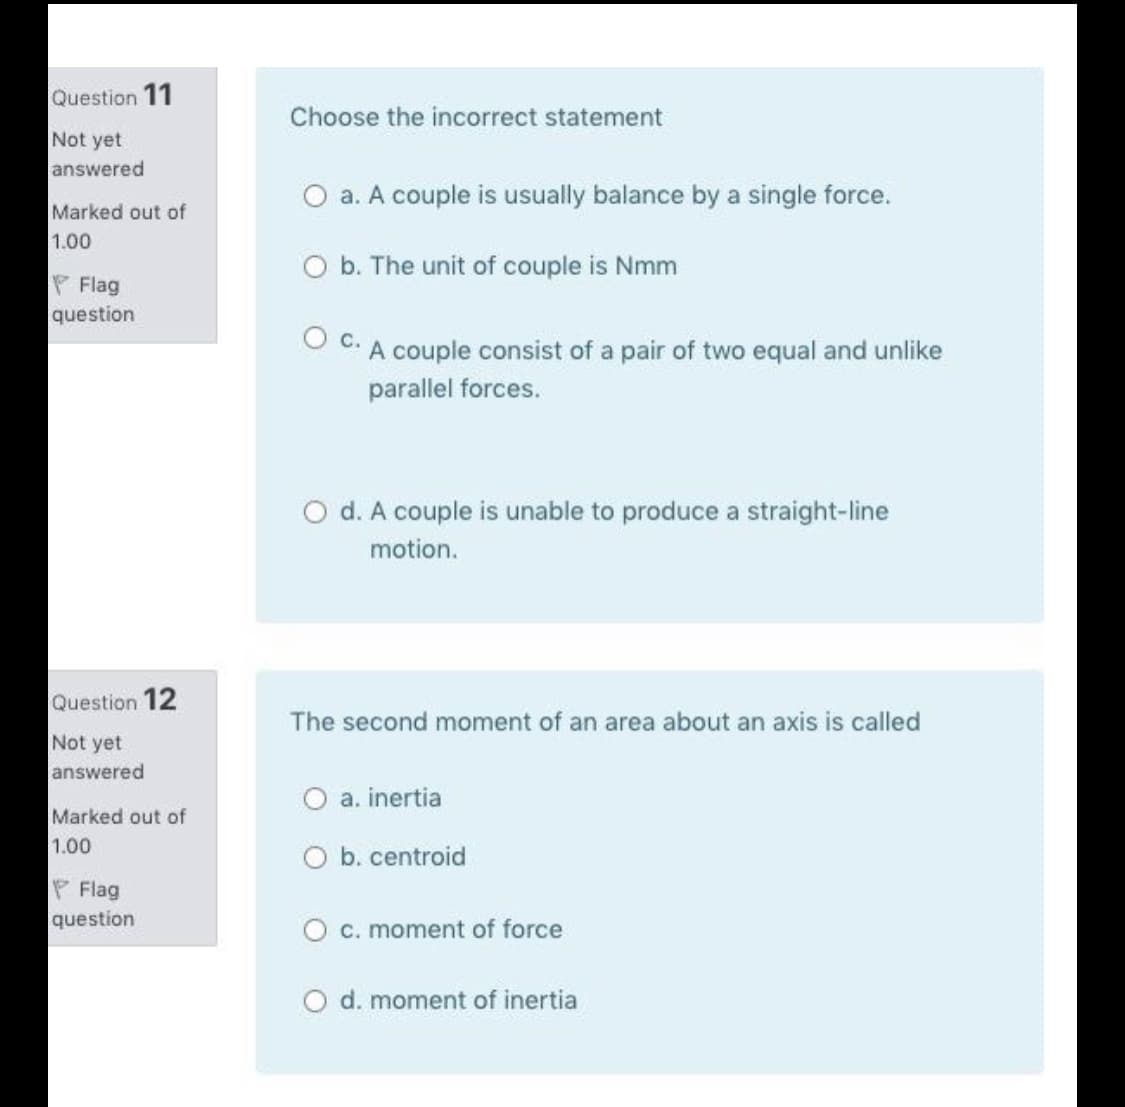 Question 11
Choose the incorrect statement
Not yet
answered
O a. A couple is usually balance by a single force.
Marked out of
1.00
O b. The unit of couple is Nmm
P Flag
question
C. A couple consist of a pair of two equal and unlike
parallel forces.
O d. A couple is unable to produce a straight-line
motion.
Question 12
The second moment of an area about an axis is called
Not yet
answered
O a. inertia
Marked out of
1.00
O b. centroid
P Flag
question
O c. moment of force
d. moment of inertia
